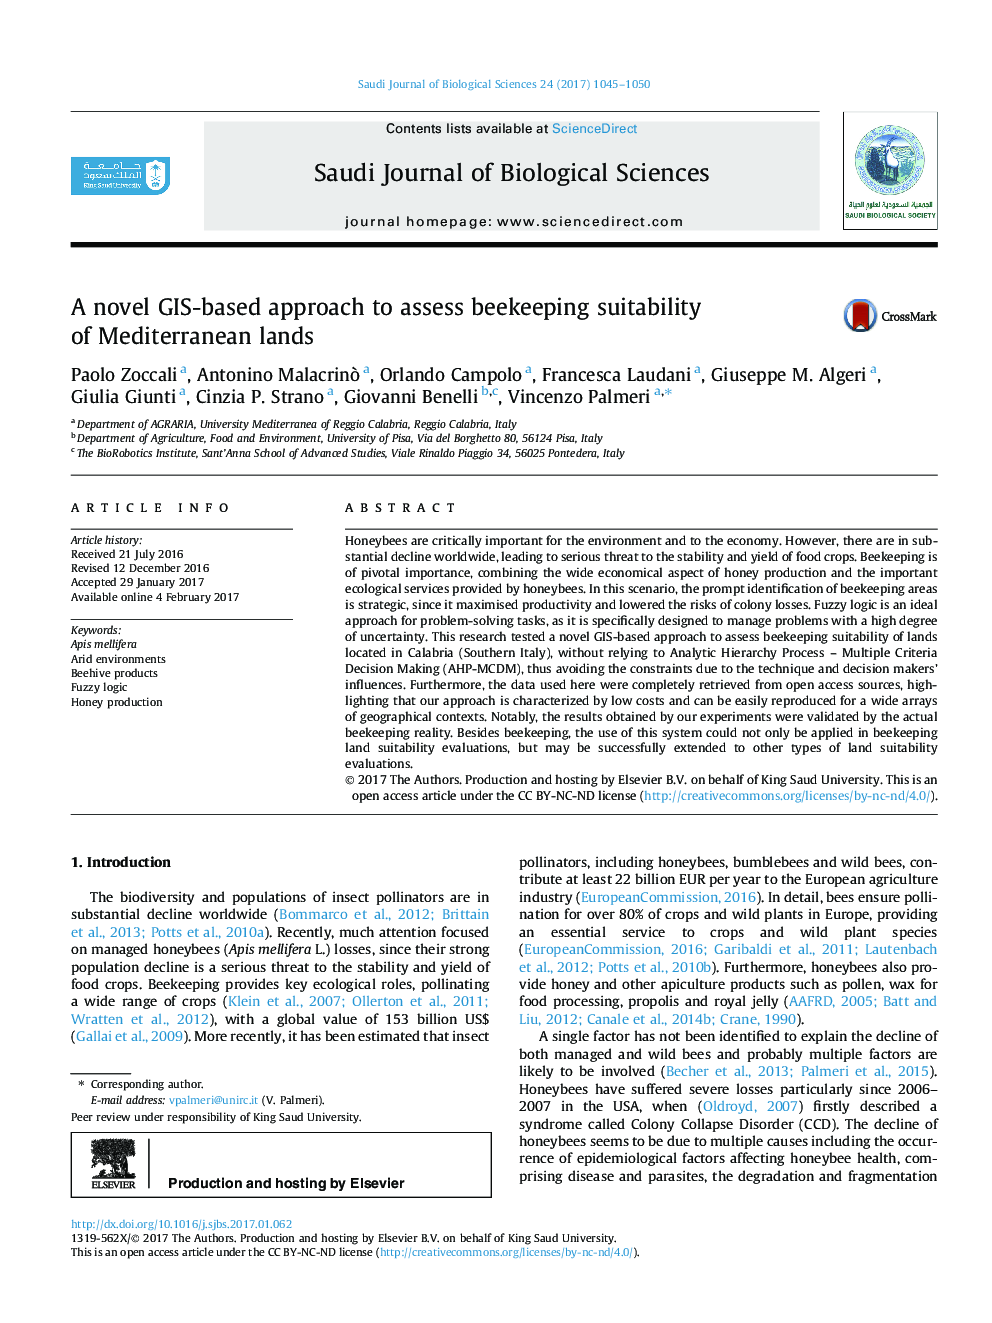 A novel GIS-based approach to assess beekeeping suitability of Mediterranean lands